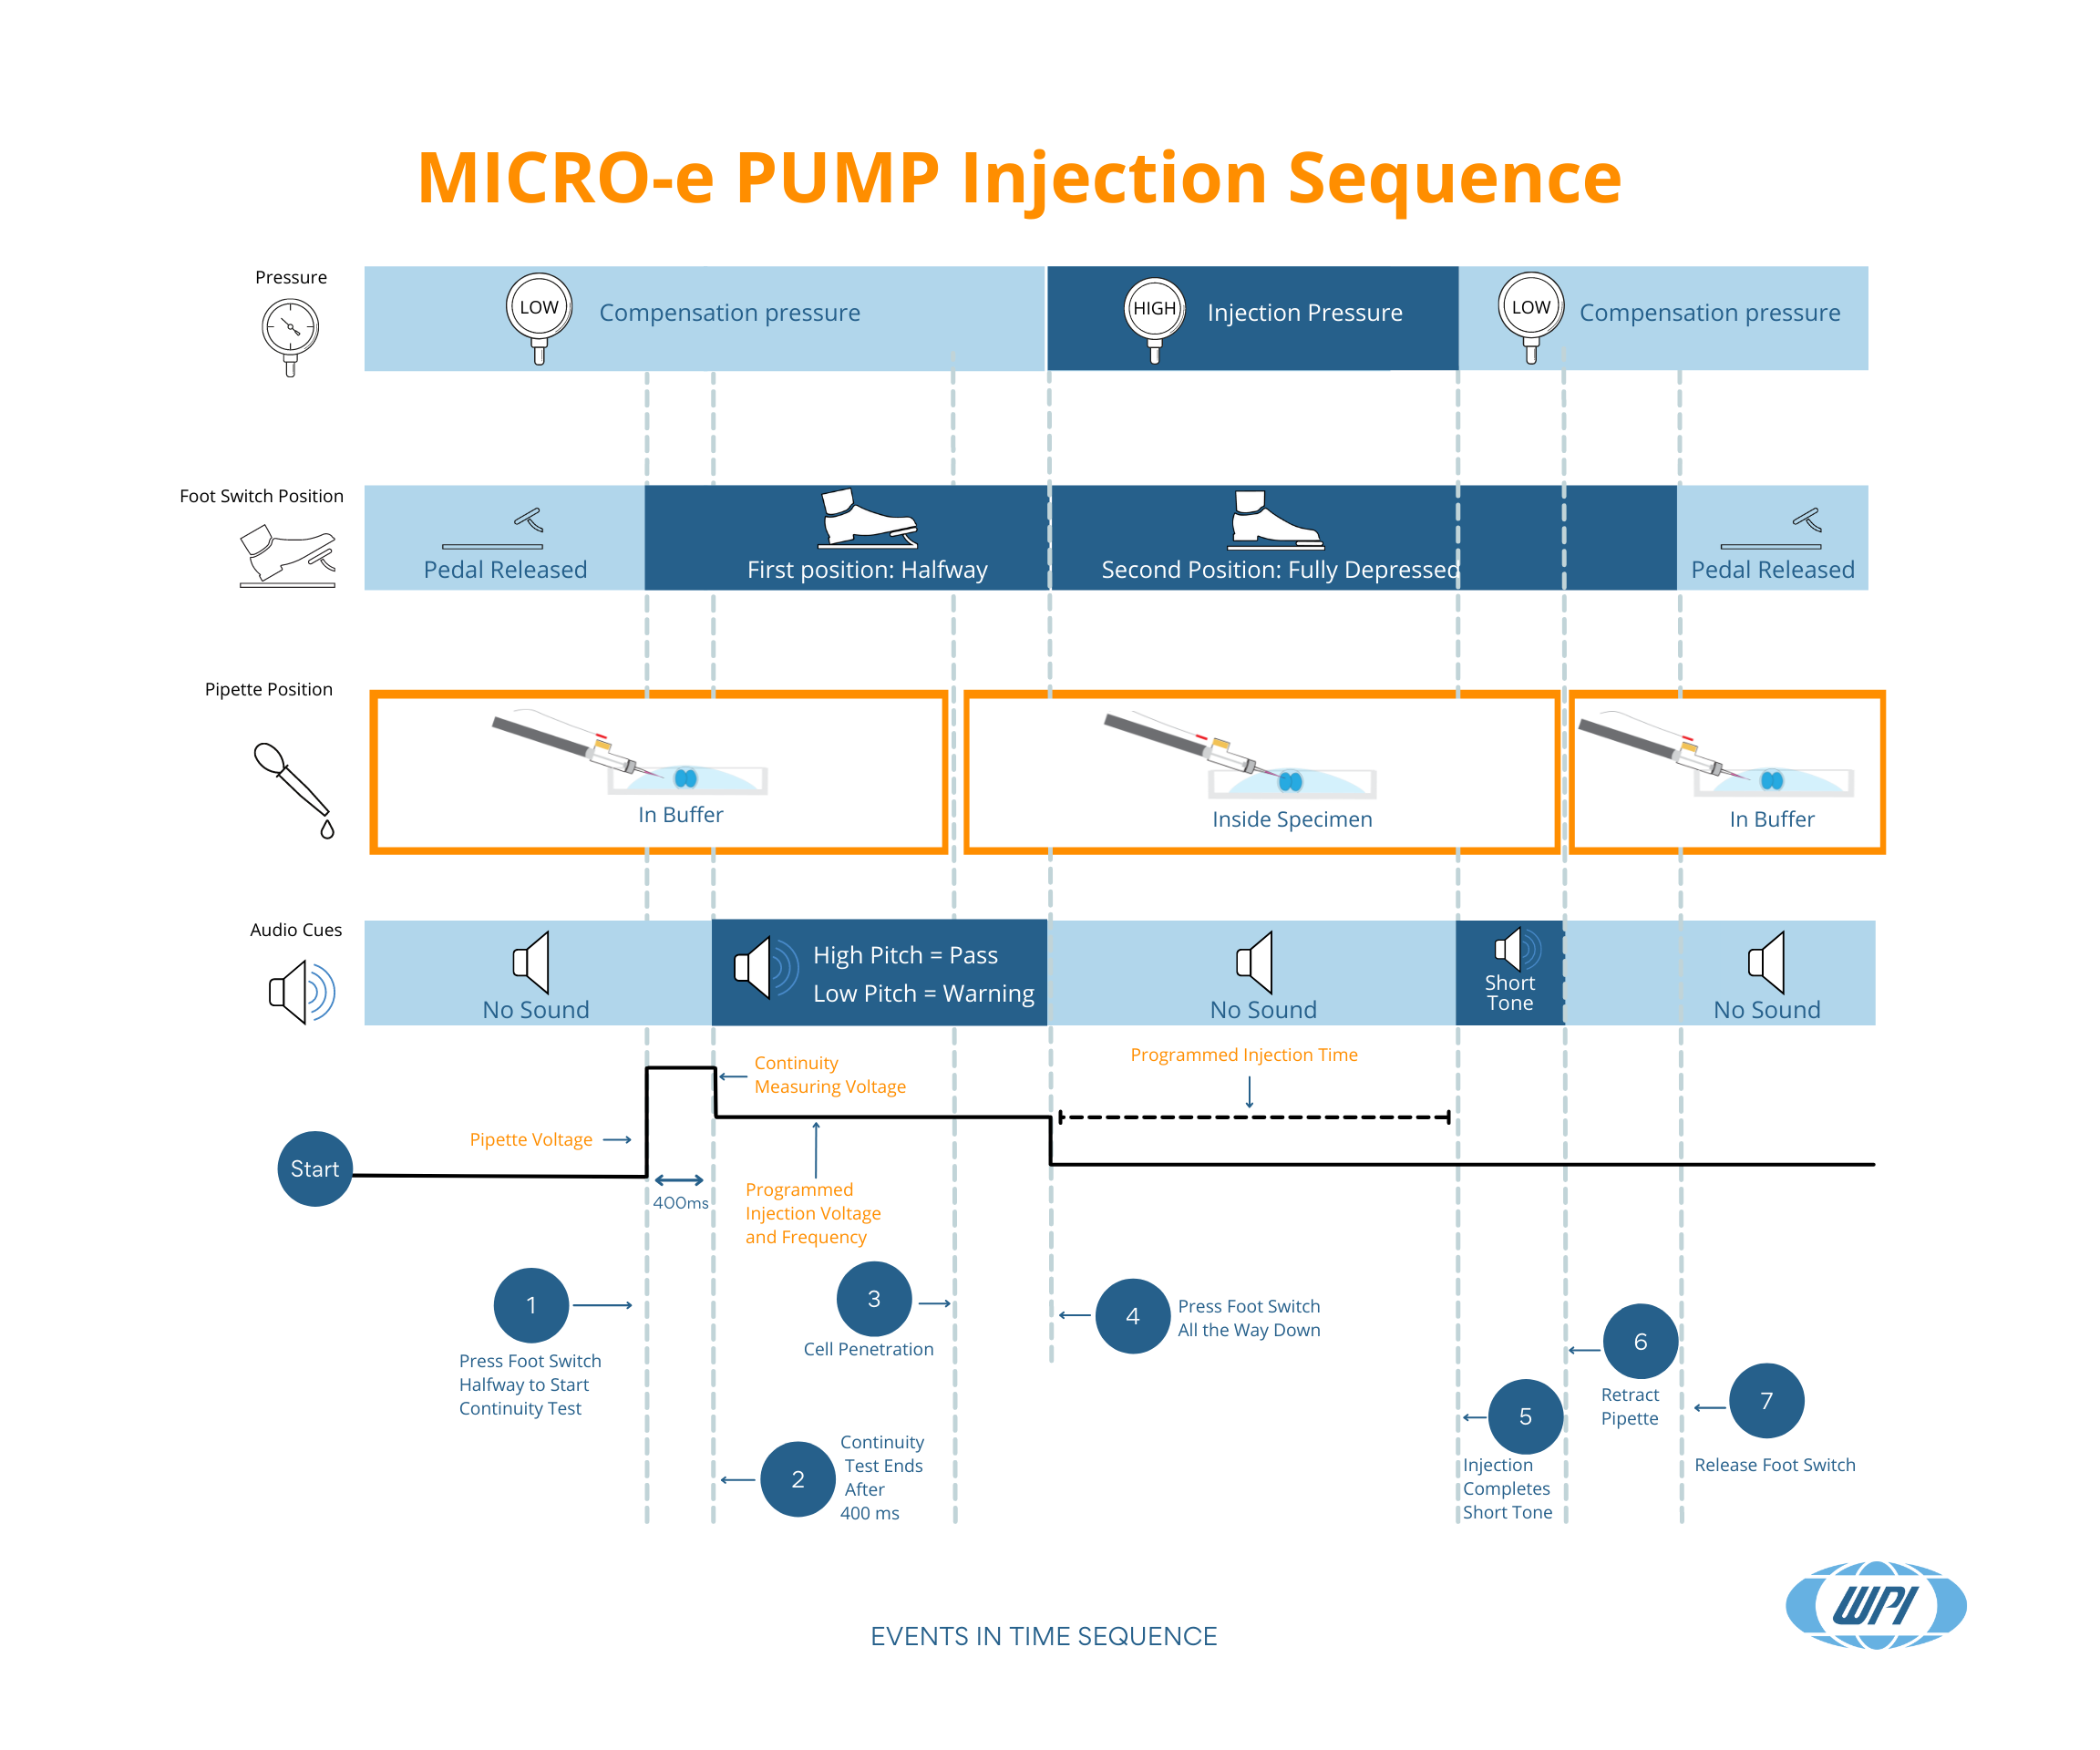 Quick Reference for the MICRO-ePUMP Injection Sequence